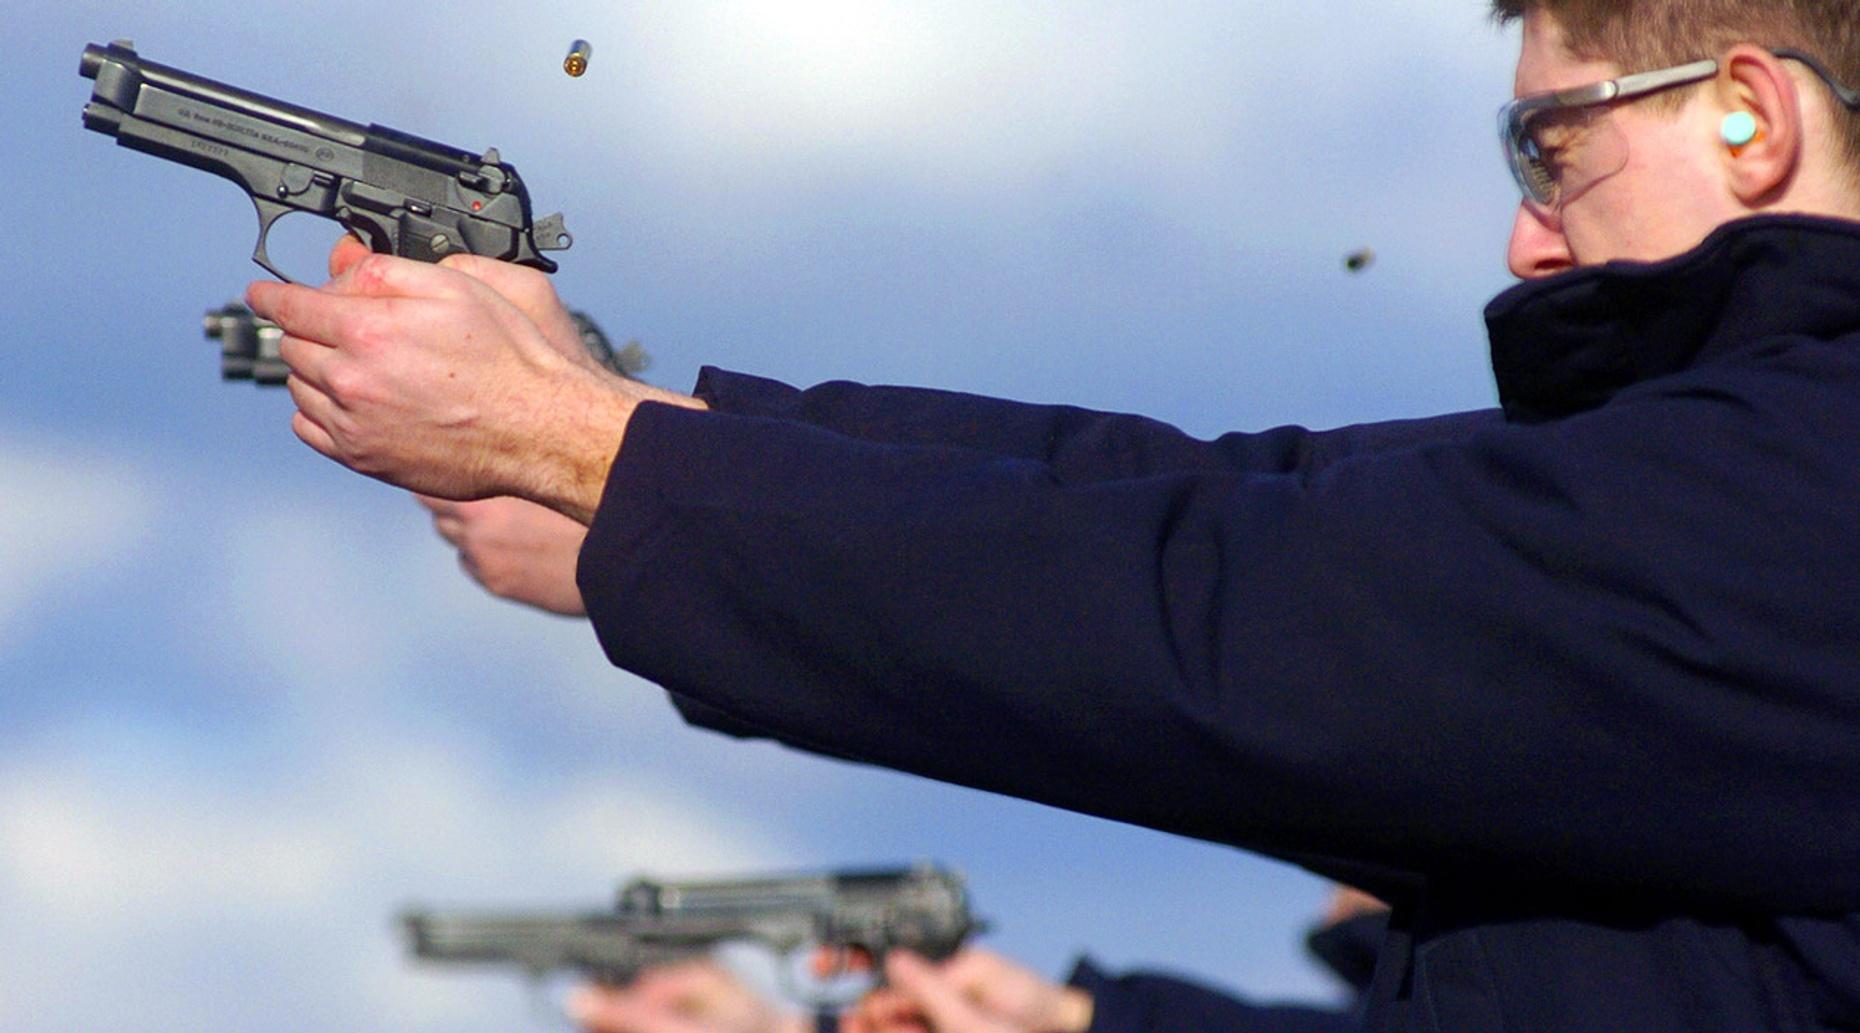 Basic Pistol & Concealed Weapon Course in Miami